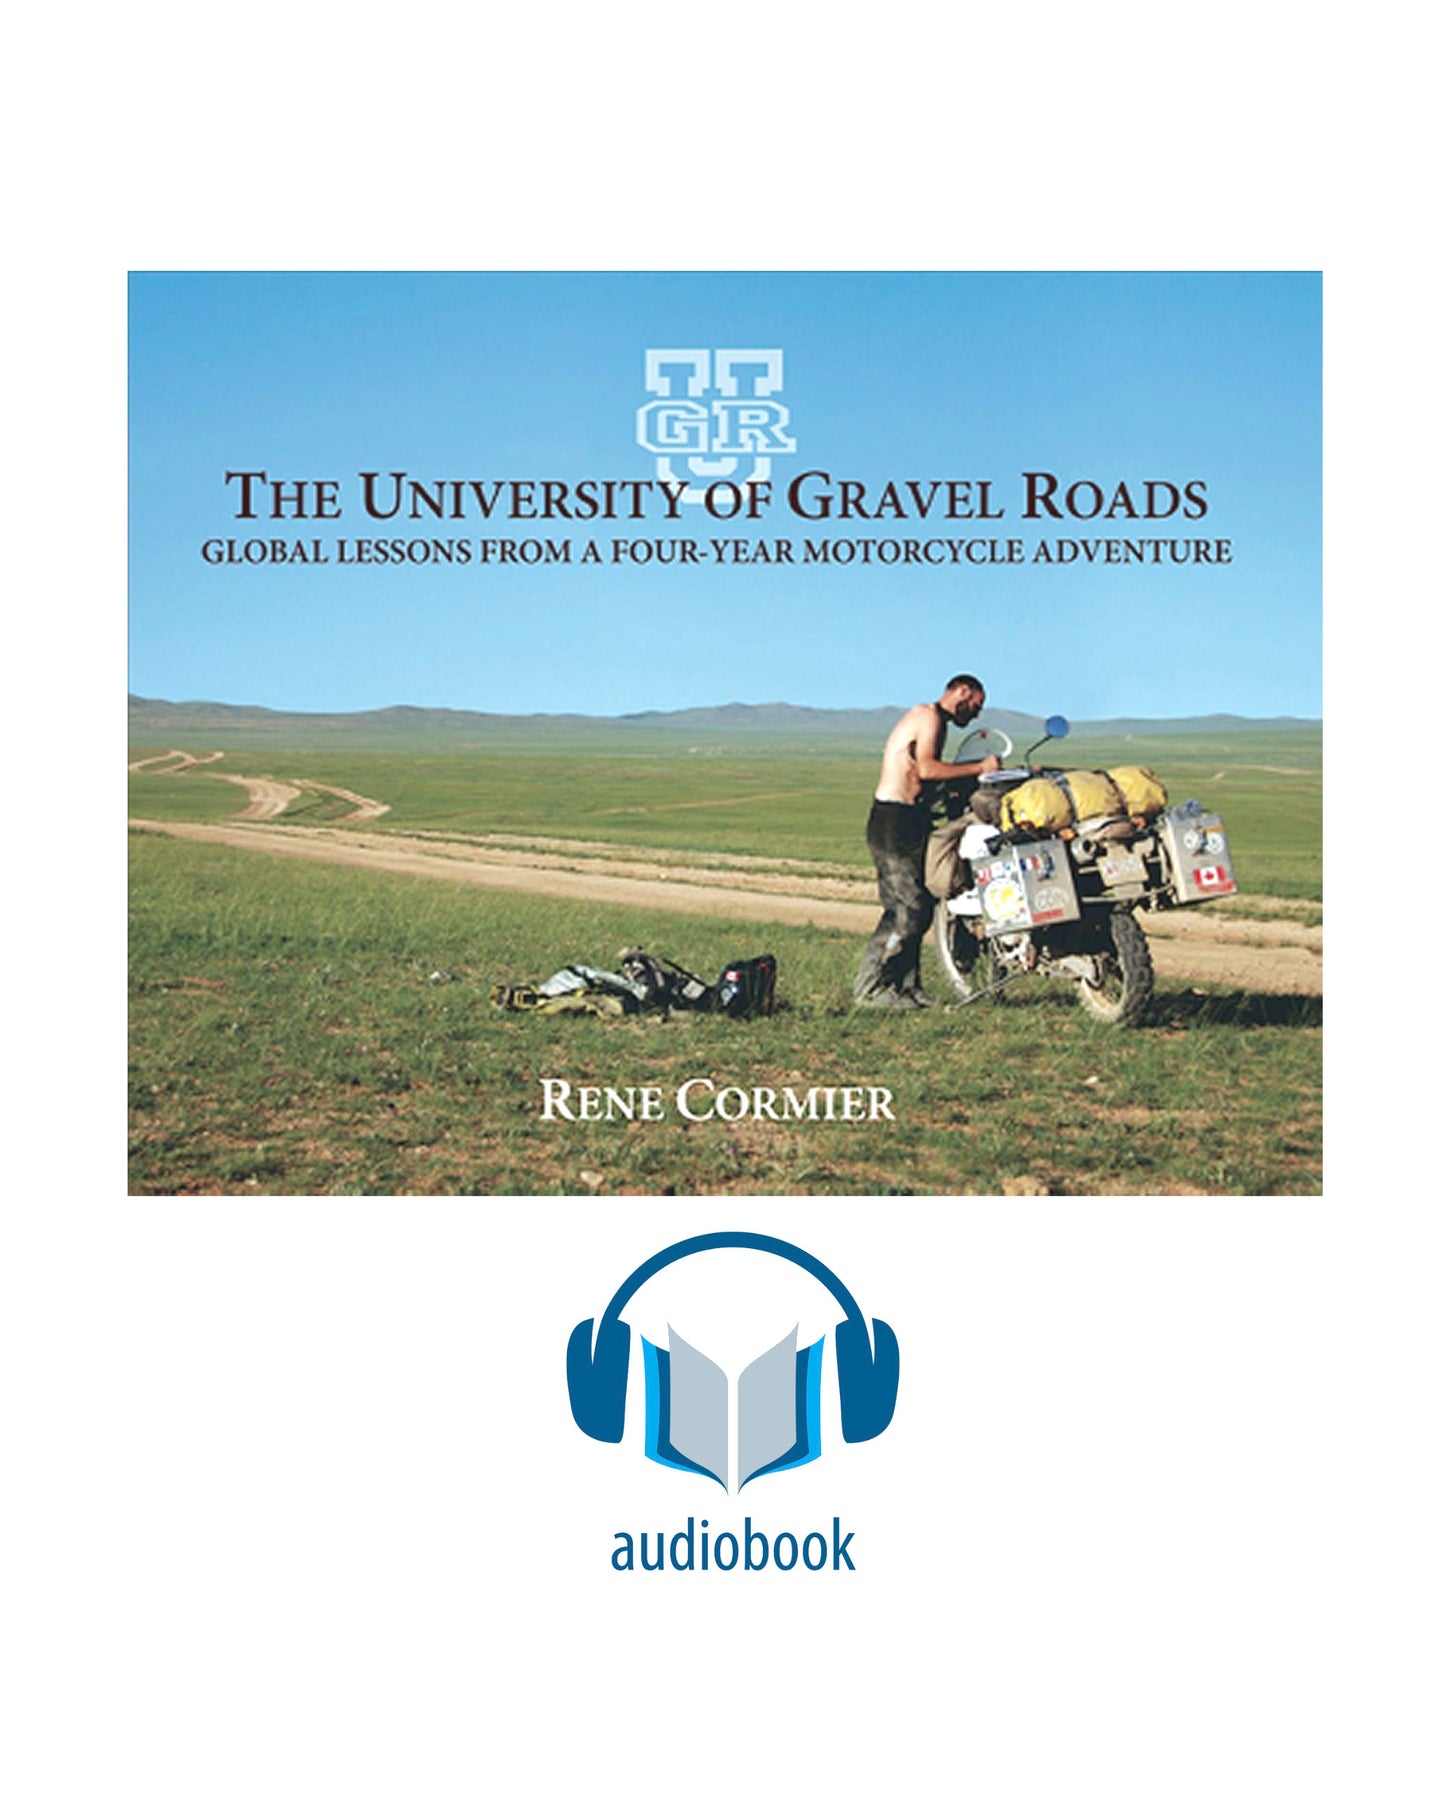 Audiobook - The University of Gravel Roads - Global Lessons from a four-year motorcycle adventure